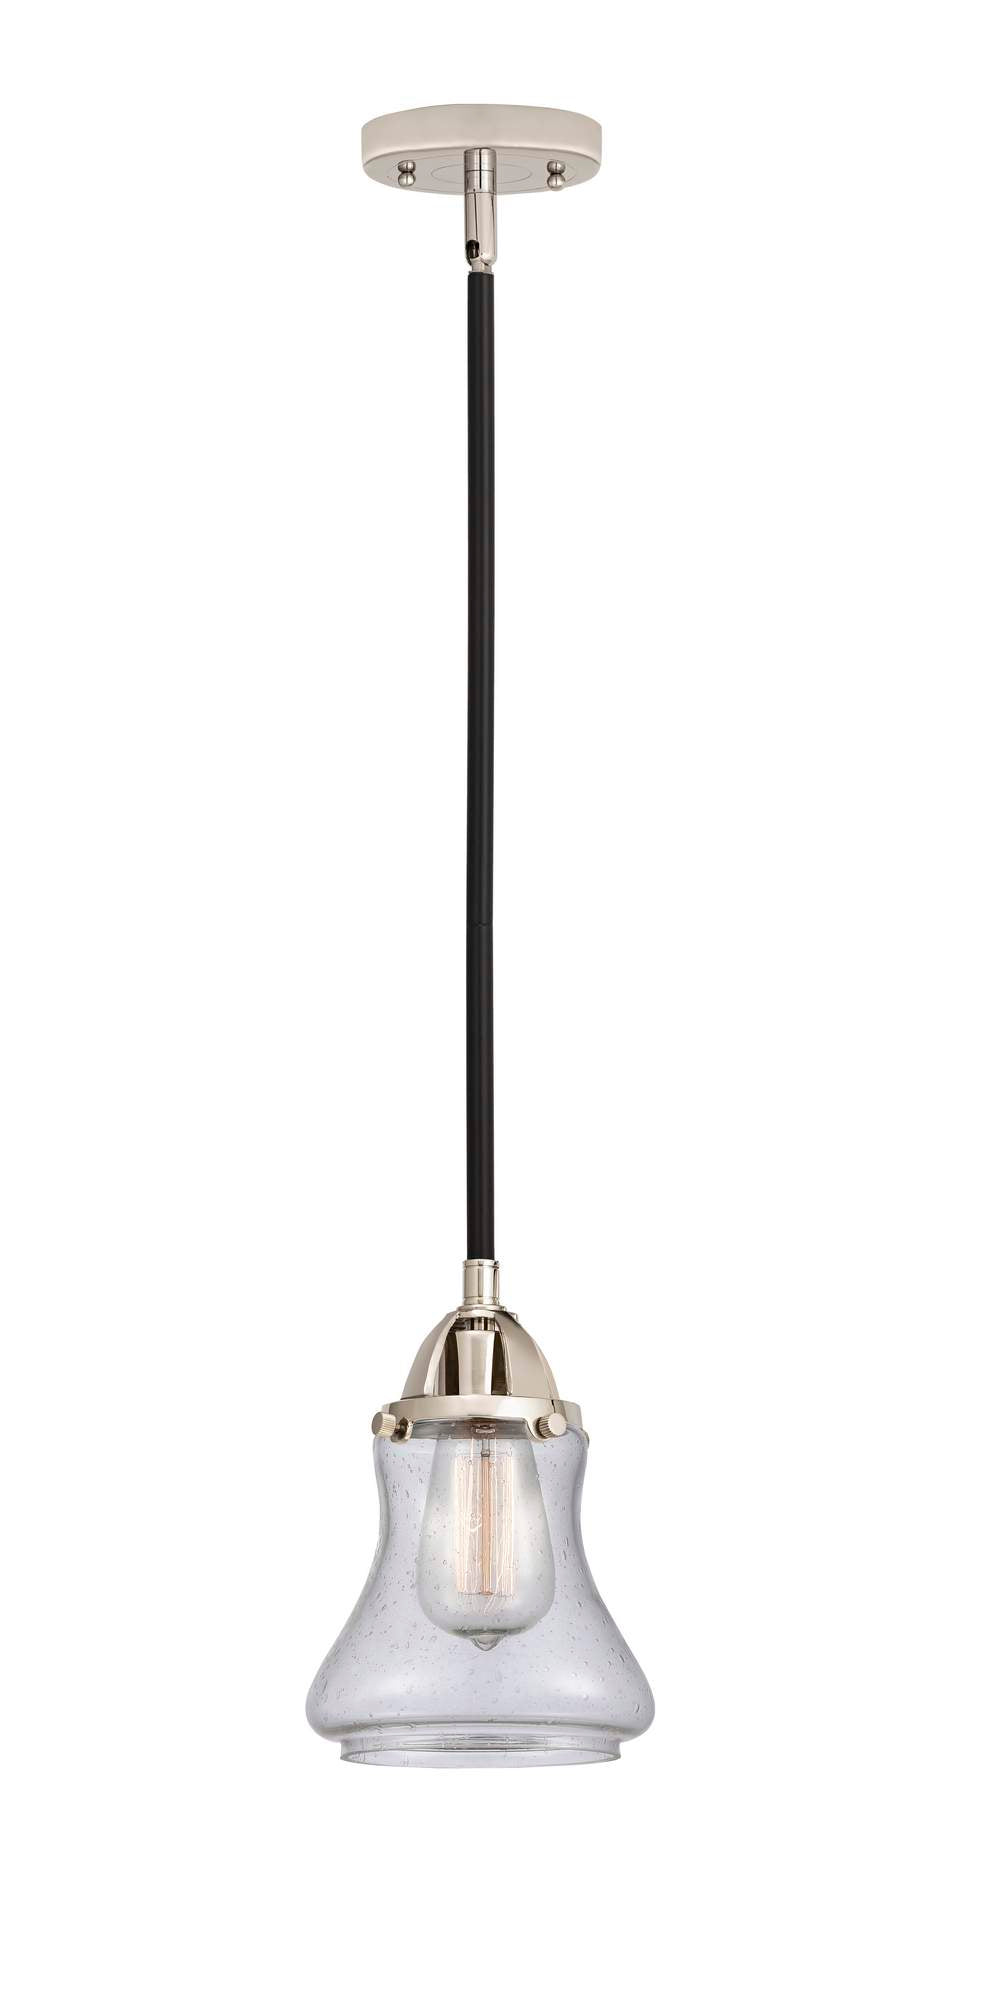 288-1S-BPN-G194 Stem Hung 6" Black Polished Nickel Mini Pendant - Seedy Bellmont Glass - LED Bulb - Dimmensions: 6 x 6 x 9<br>Minimum Height : 18.5<br>Maximum Height : 42.5 - Sloped Ceiling Compatible: Yes